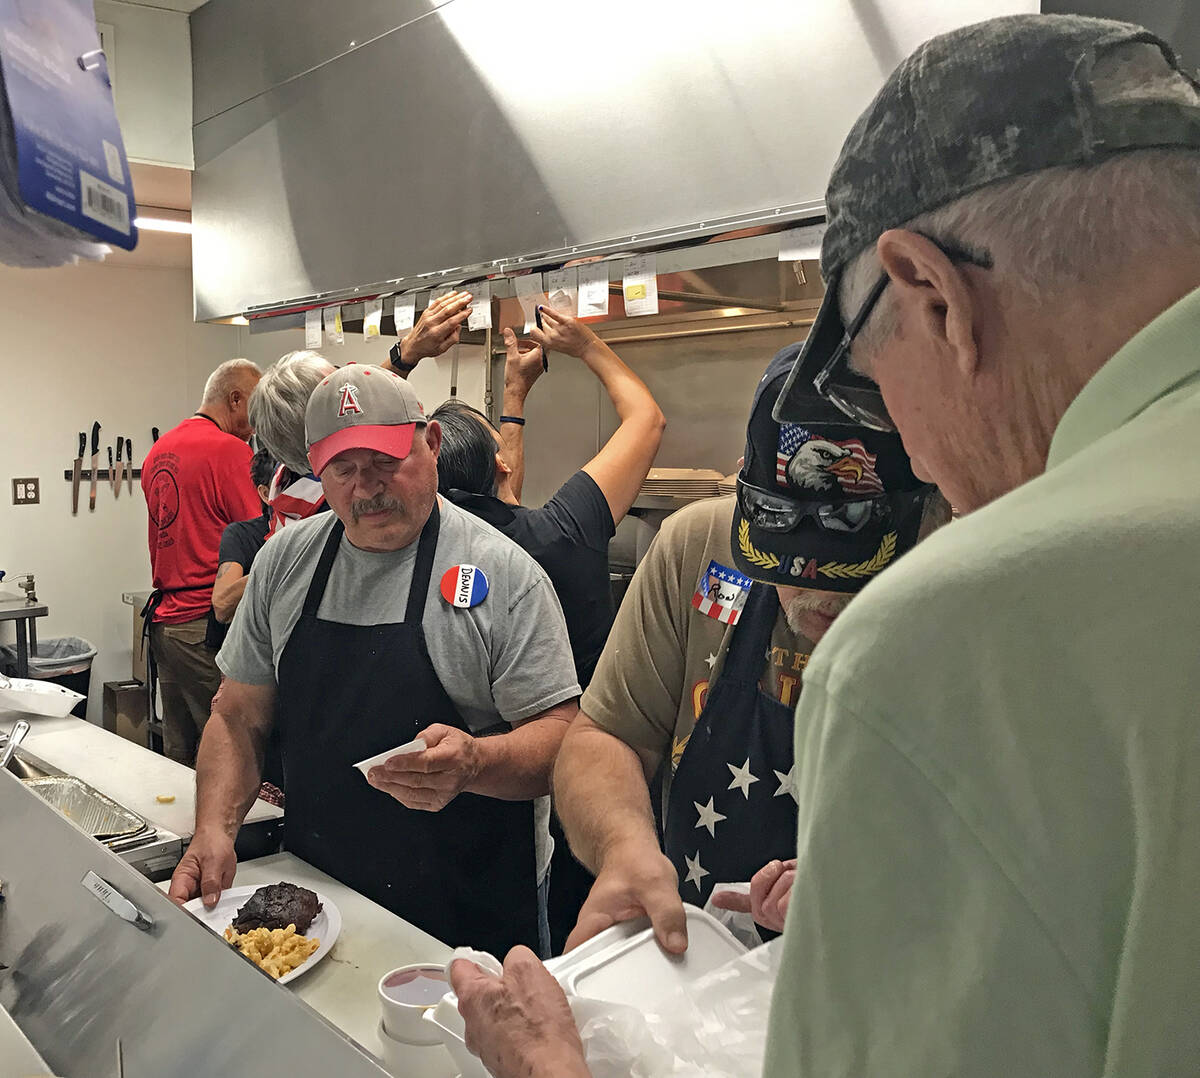 Robin Hebrock/Pahrump Valley Times A peek inside the kitchen during the Rib Extravaganza reveal ...